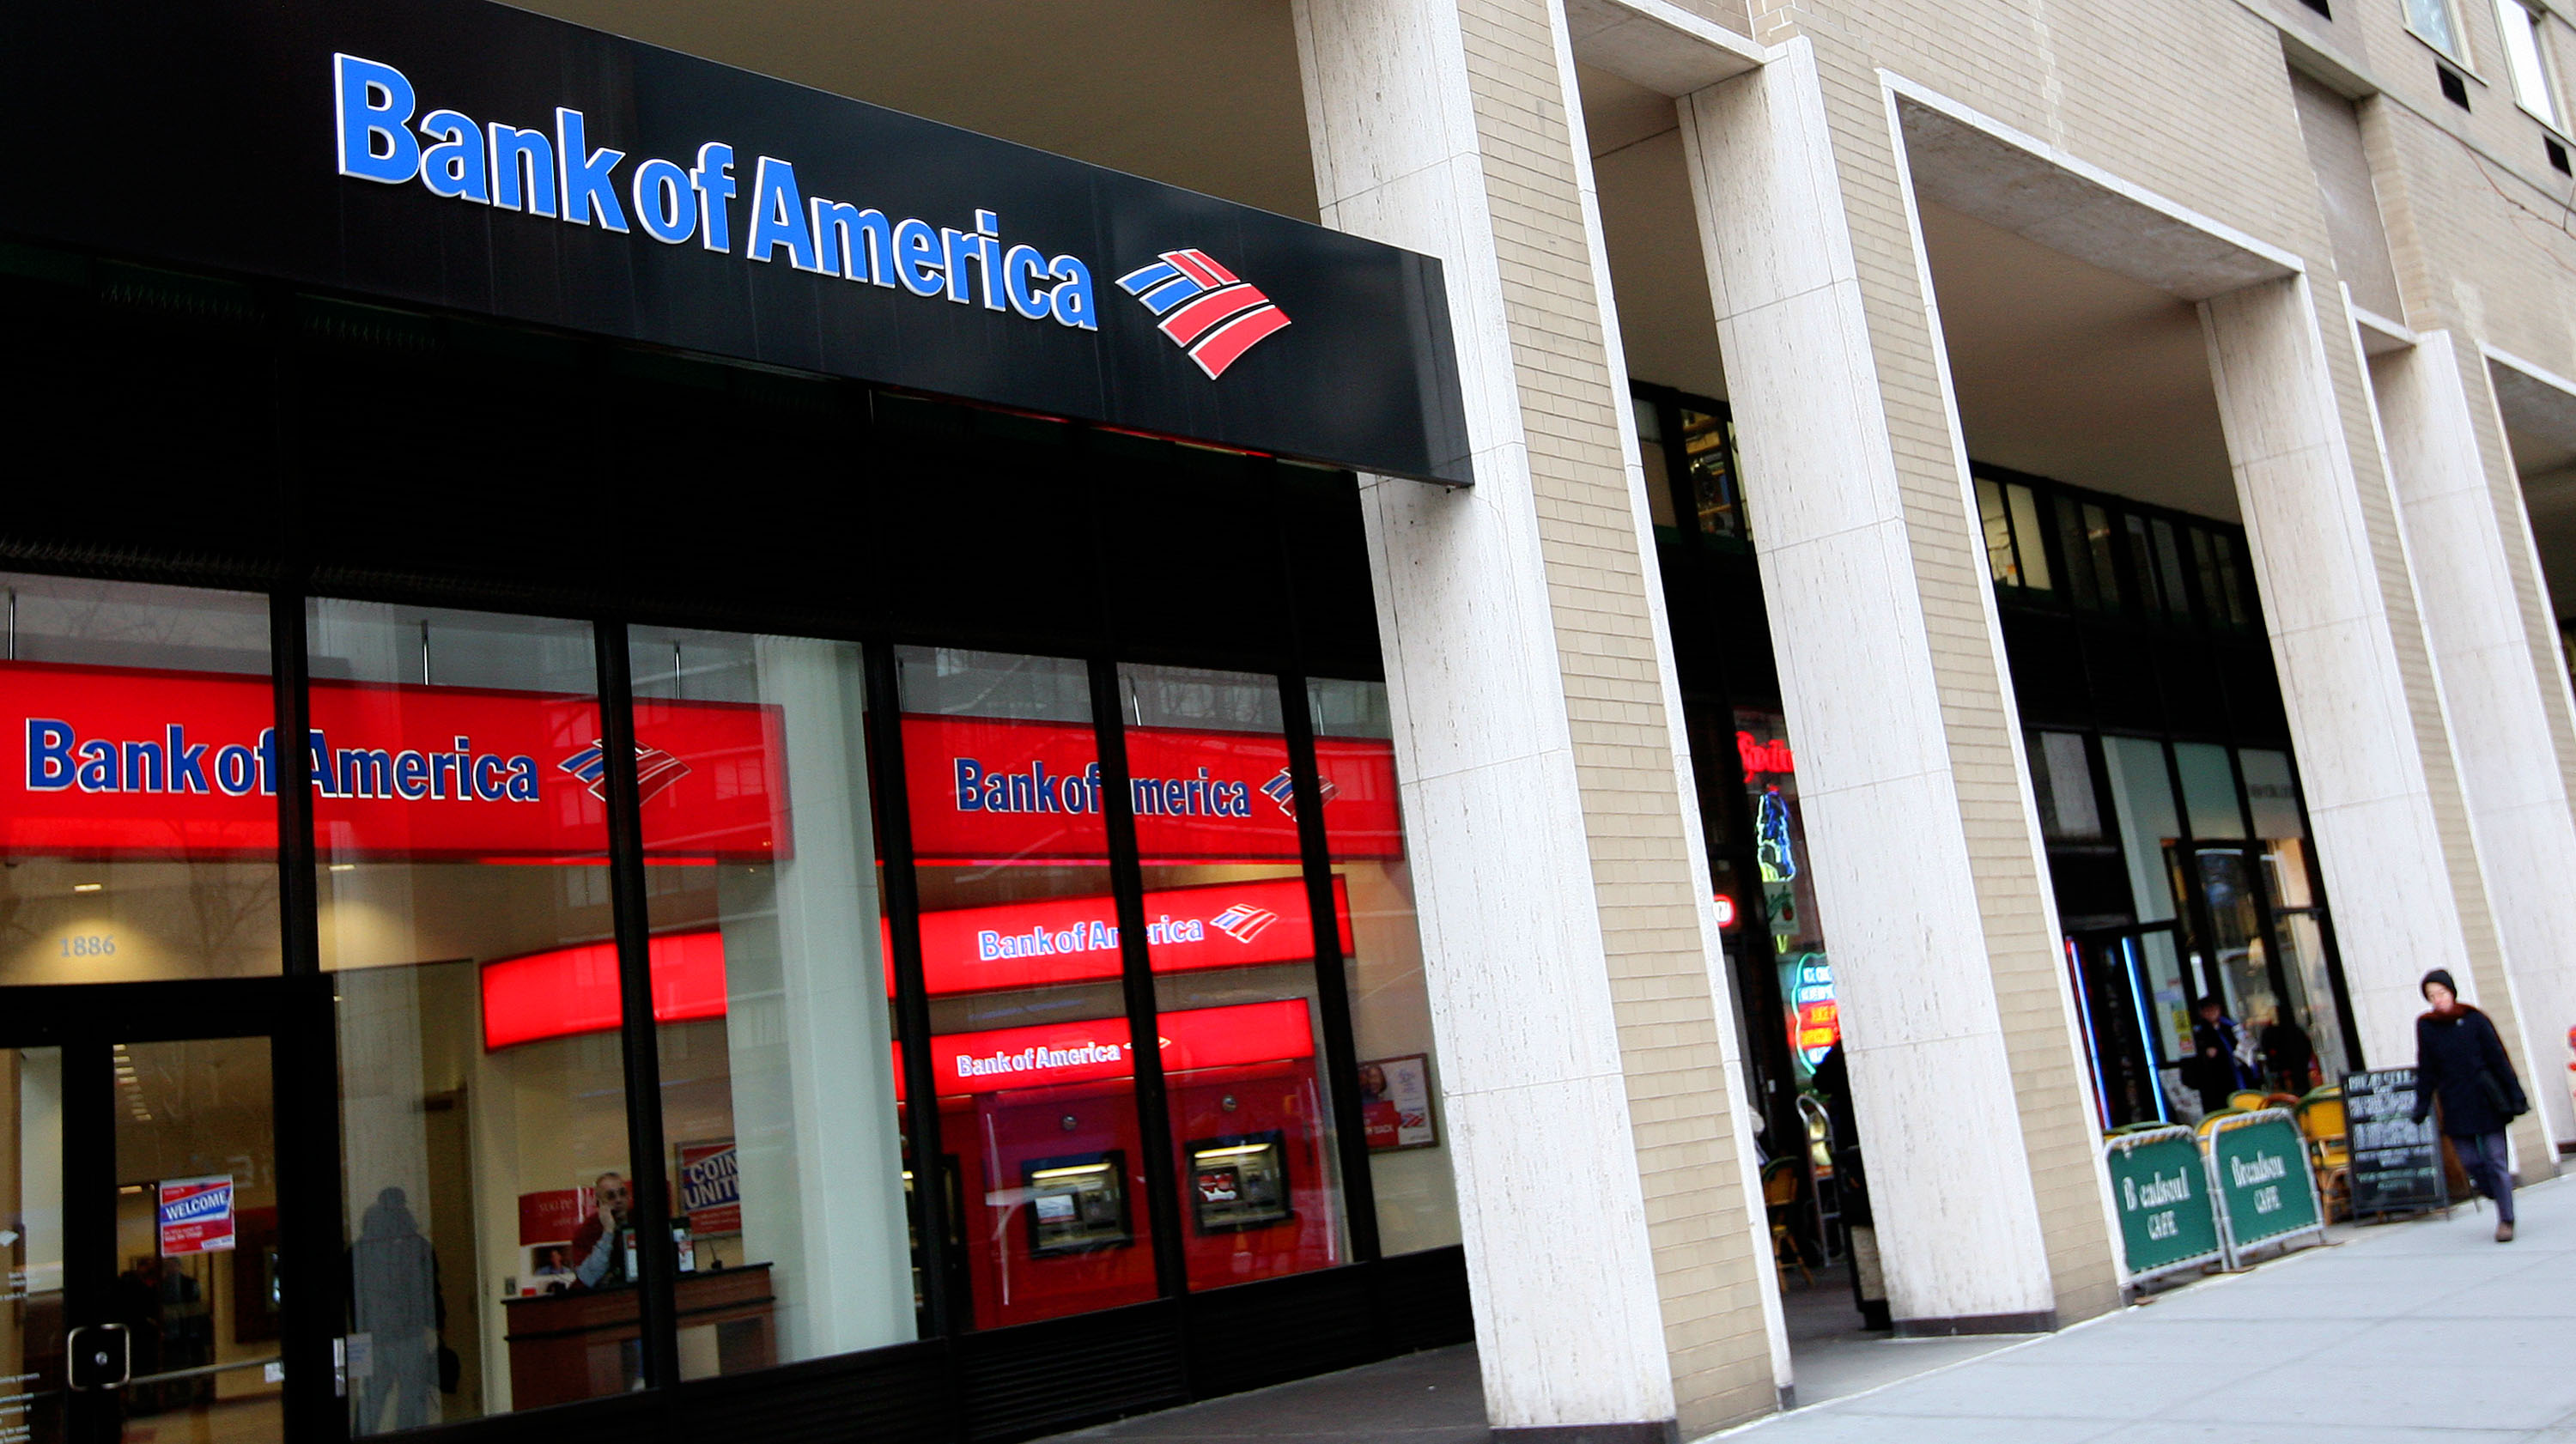 Exterior of a Bank of America branch.